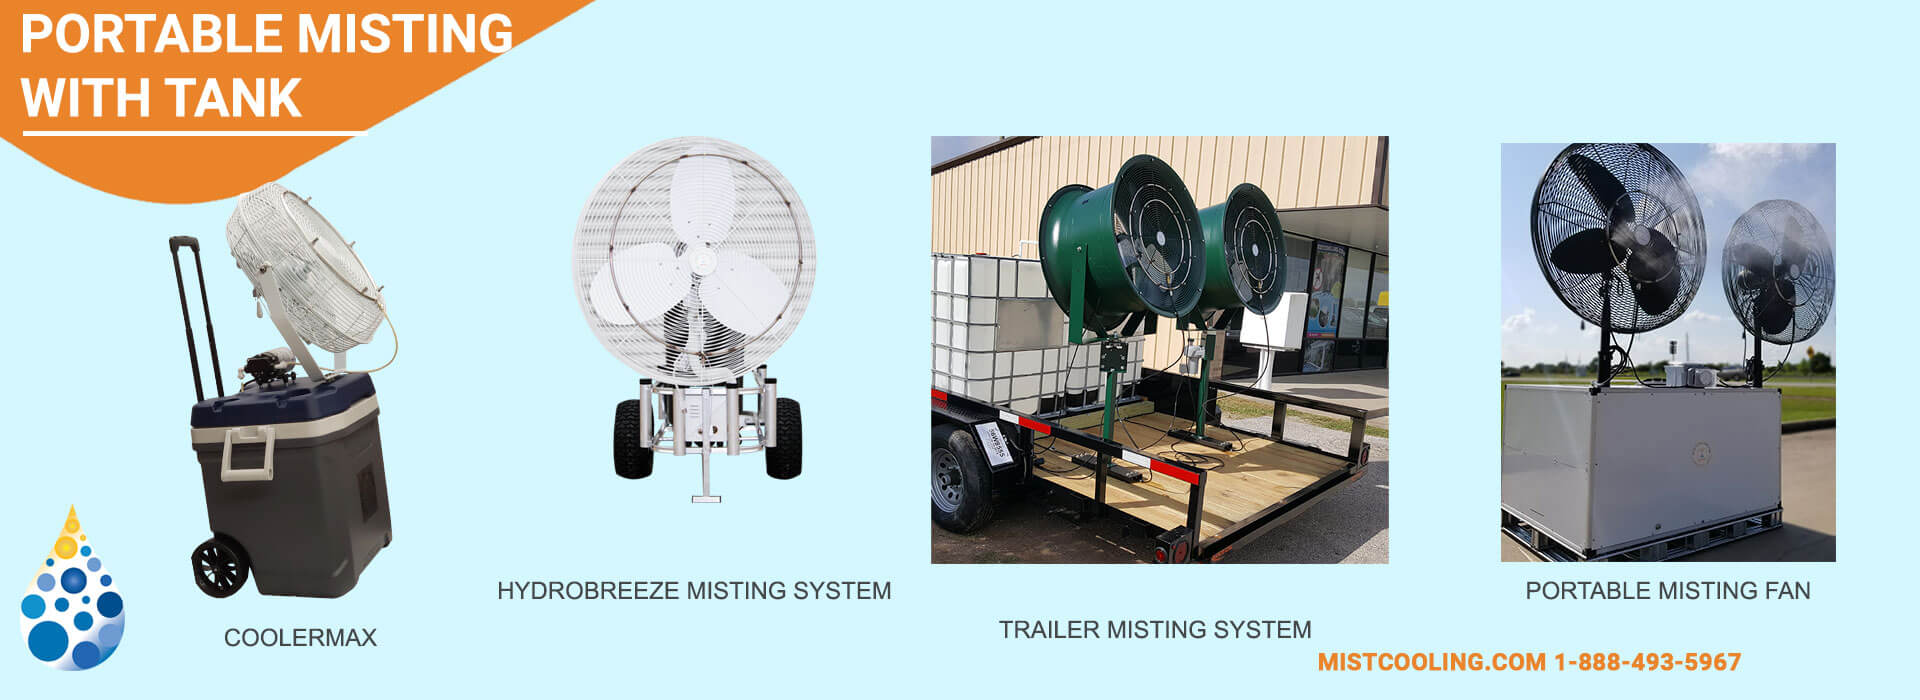 Portable Misting Systems